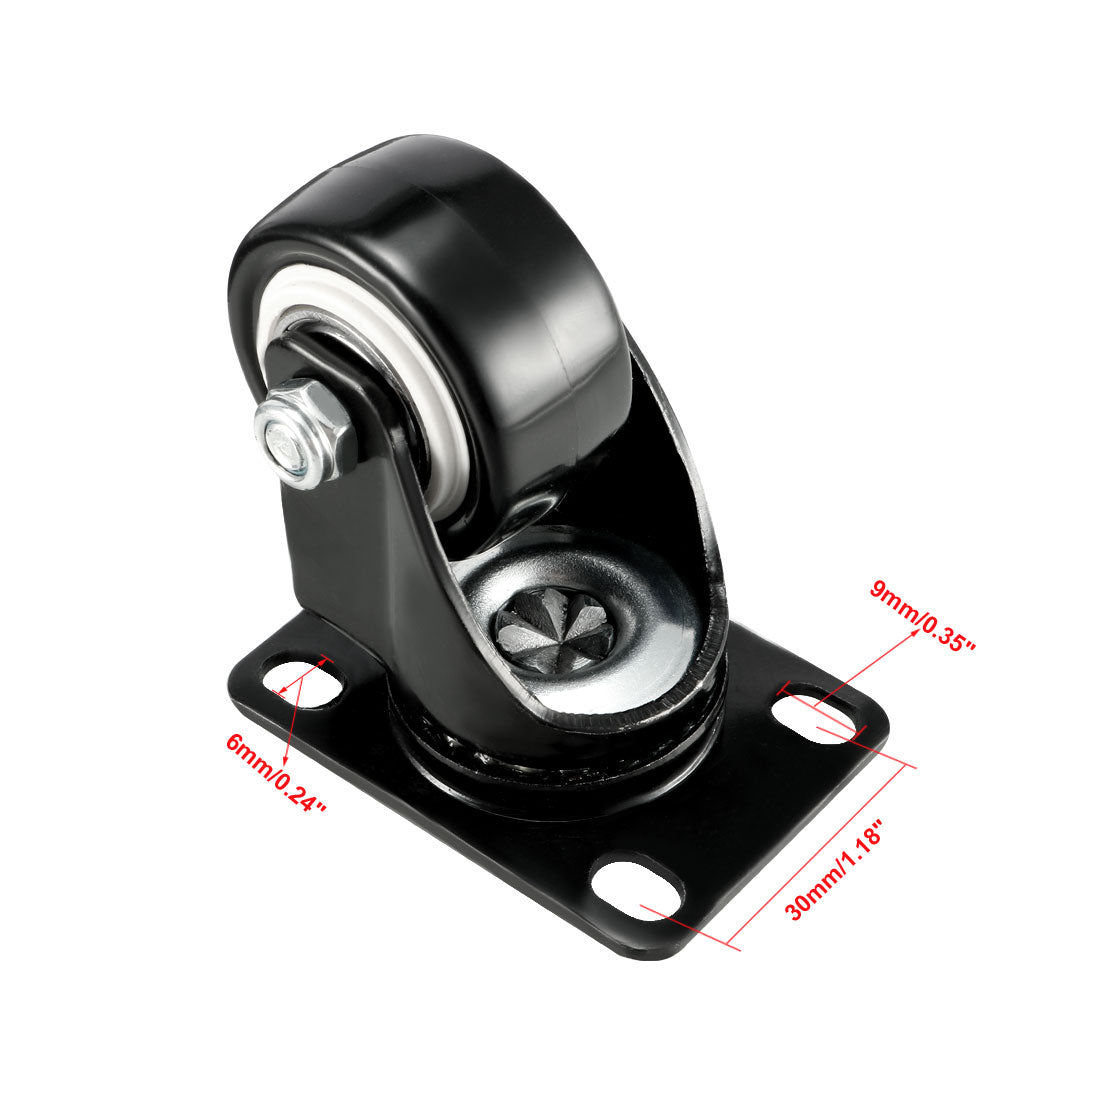 uxcell Uxcell Swivel Fixed Casters 1.5 Inch PU Top Plate Mounted Caster Wheels, 110lb Capacity Each, 4 Pcs (2 Pcs Swivel, 2 Pcs Fixed)